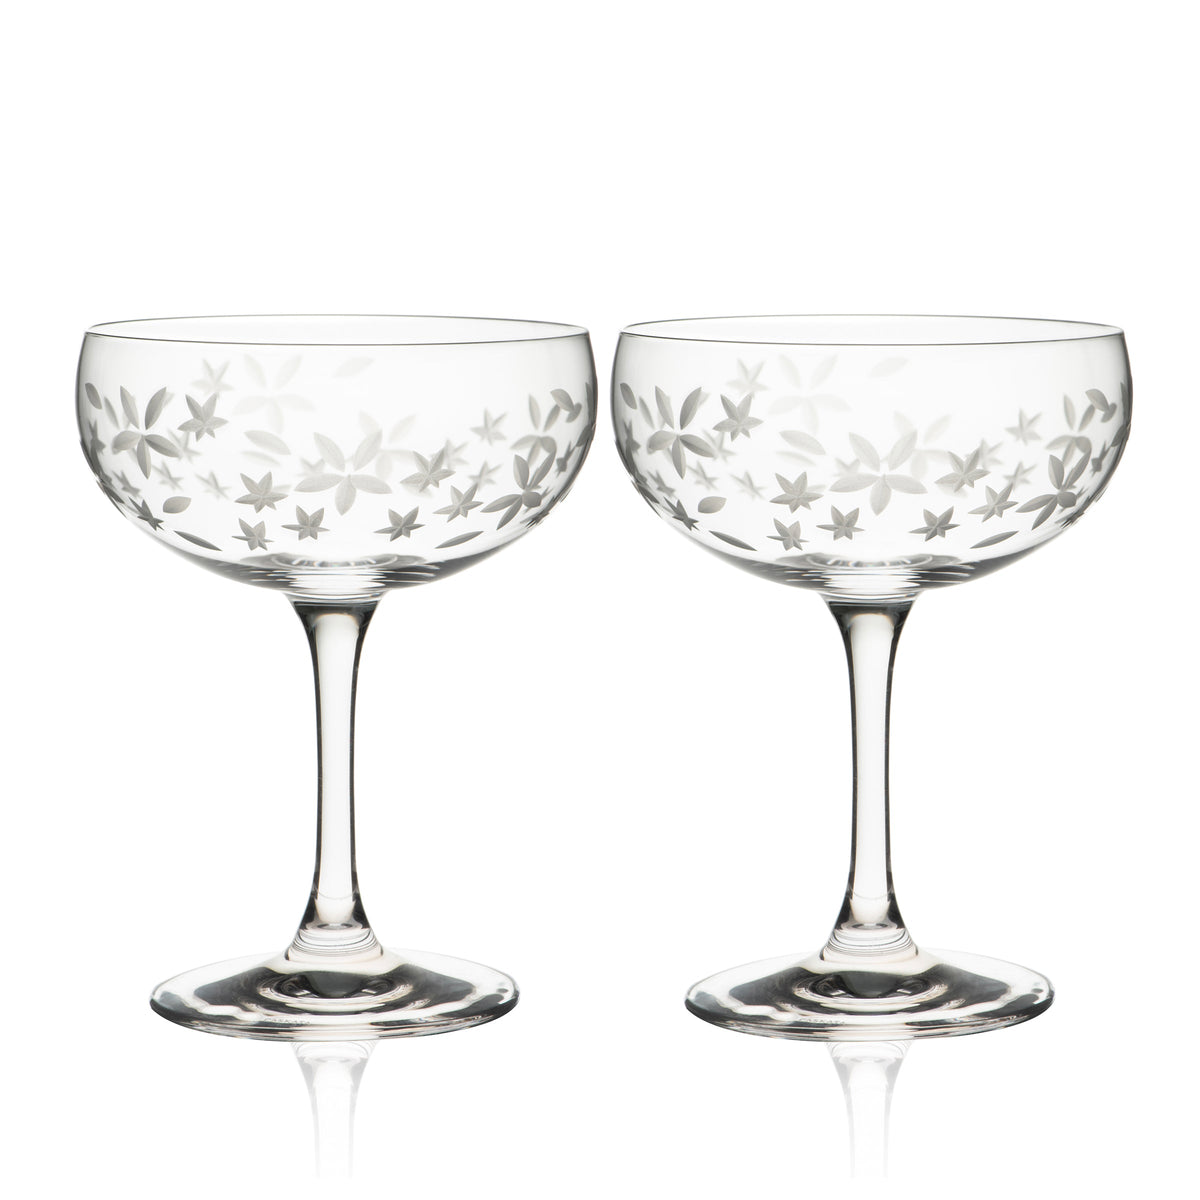 A pair of Chatham Bloom Coupe Cocktail Glasses with a delicate floral pattern. (Brand: Caskata)